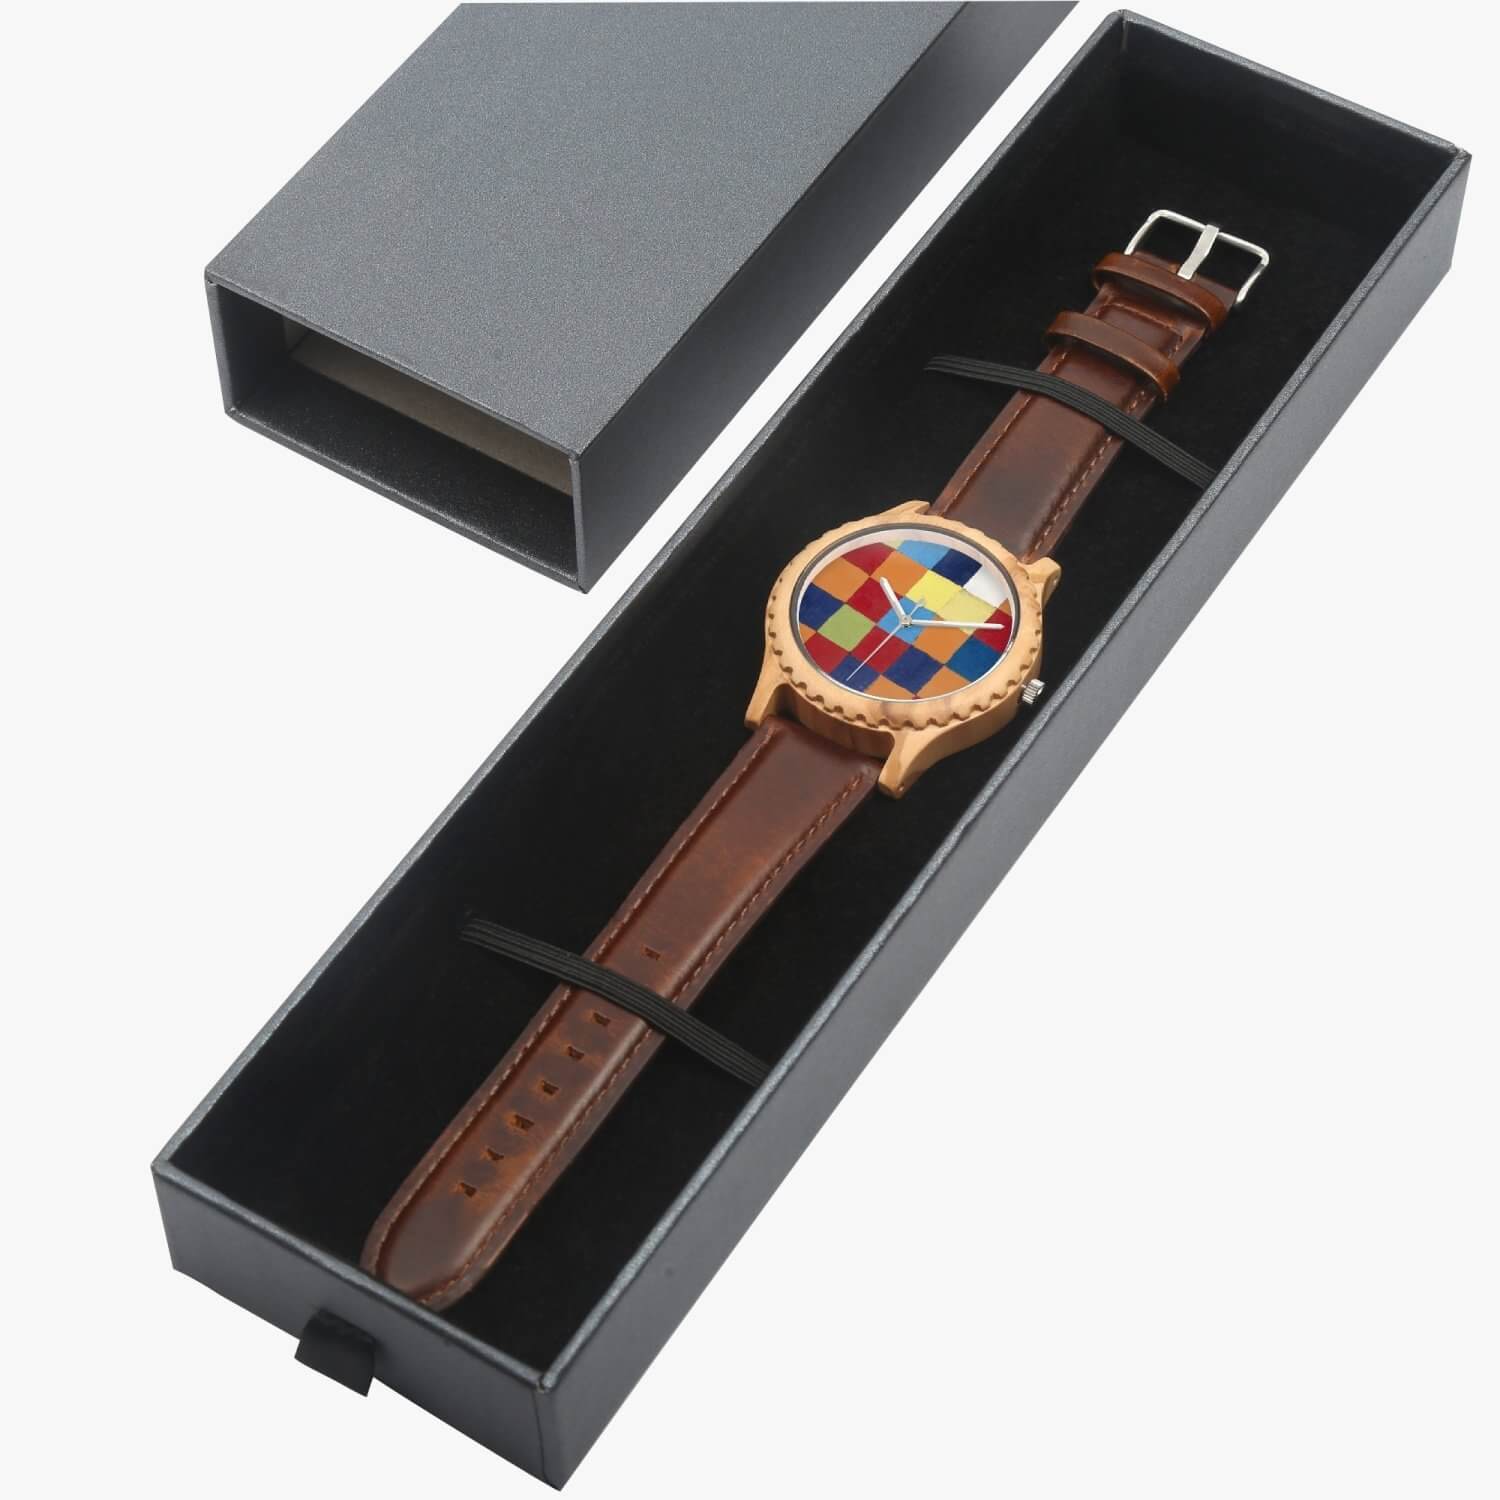 Italian Olive Lumber Wooden Watch - Leather Strap Print on any thing USA/STOD clothes